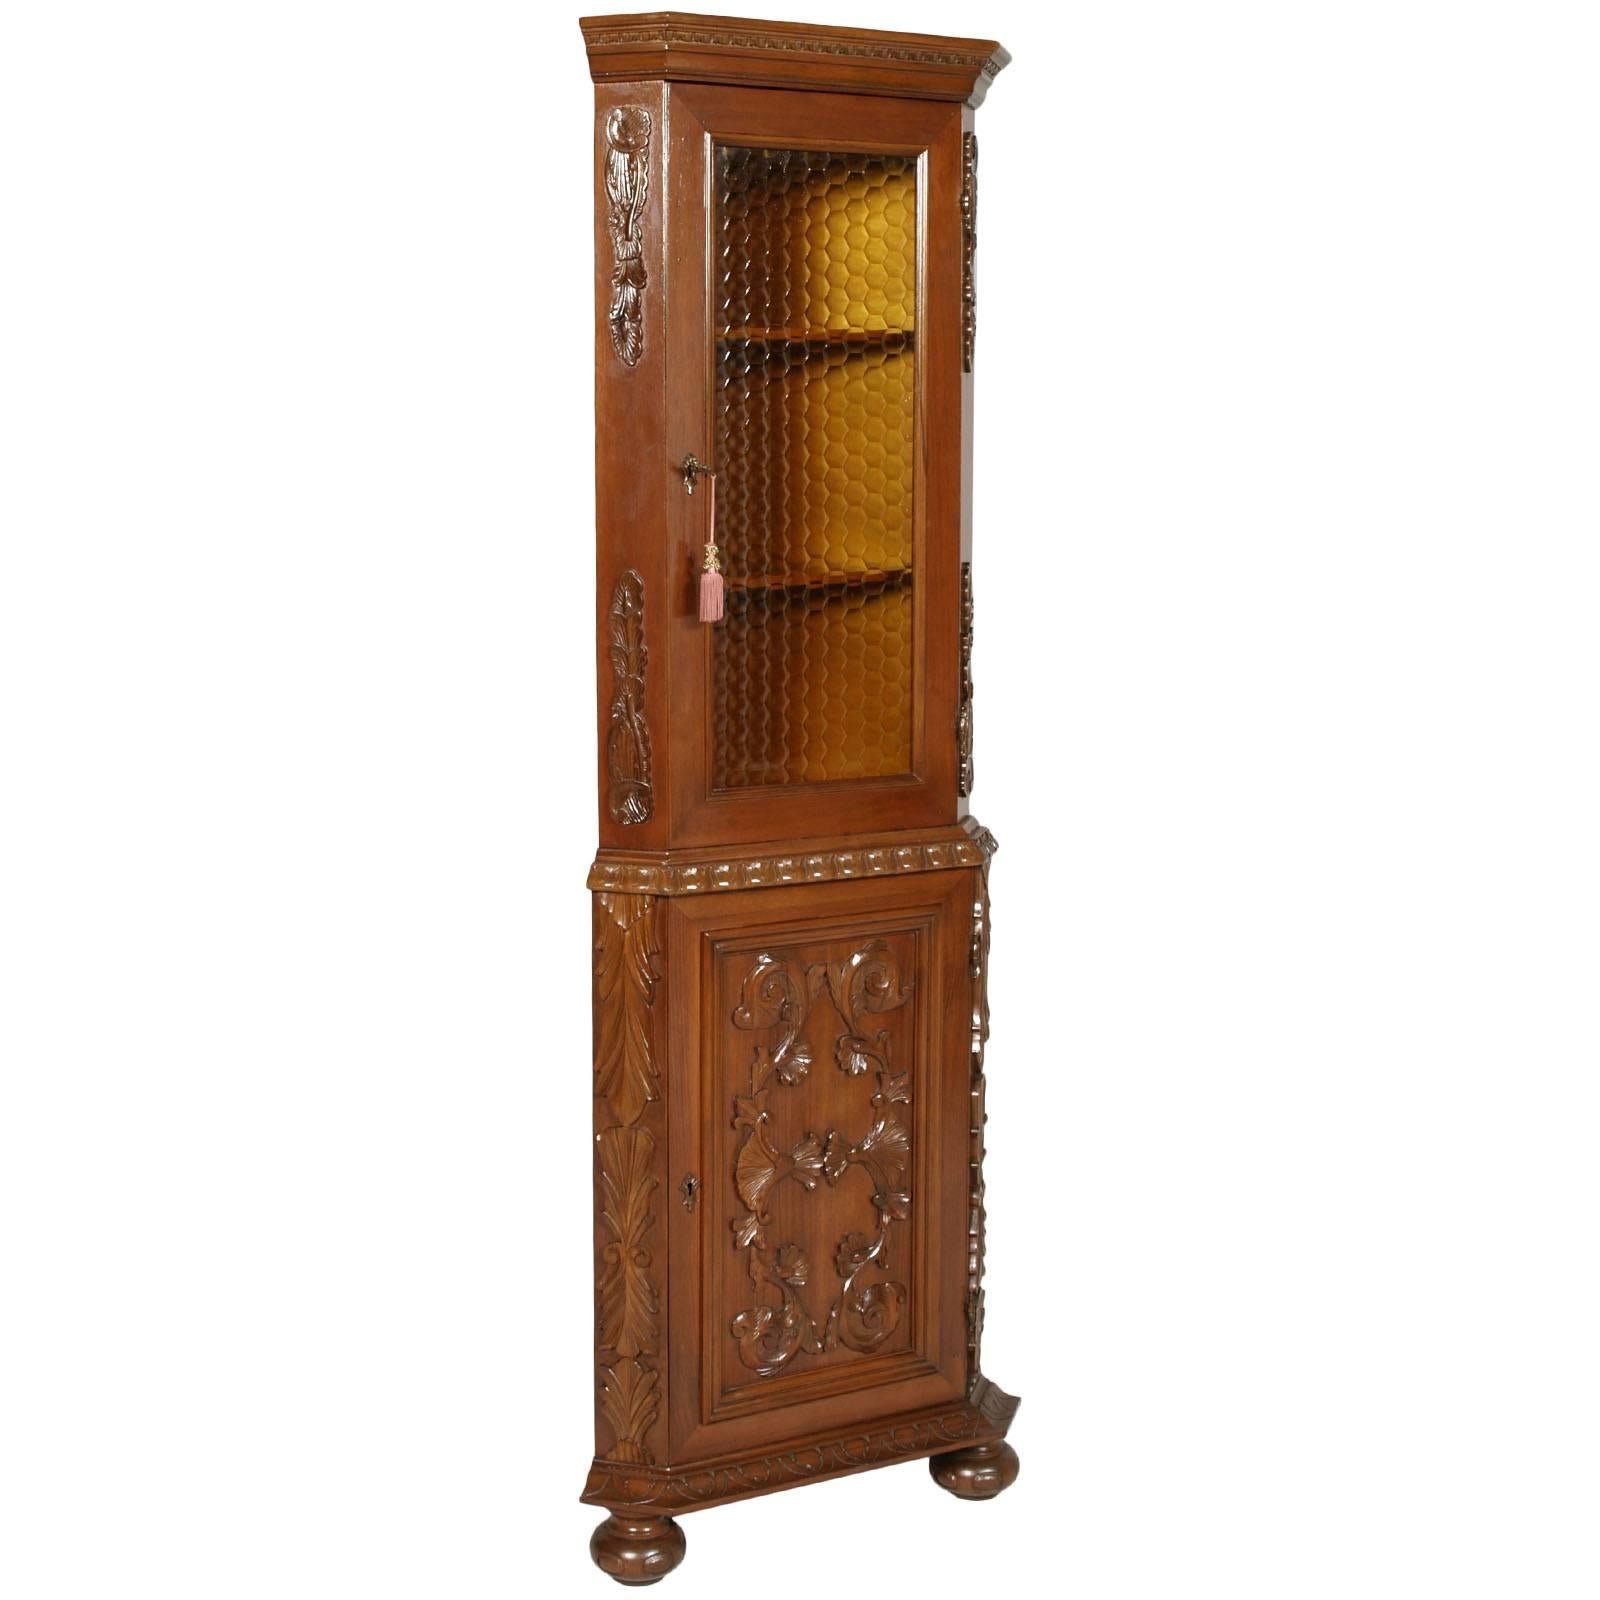 Italy cupboard Renaissance style by Michele Bonciani in hand-carved walnut, polished to wax, circa 1930s.
Measures cm: H 190, W 64, D 45.